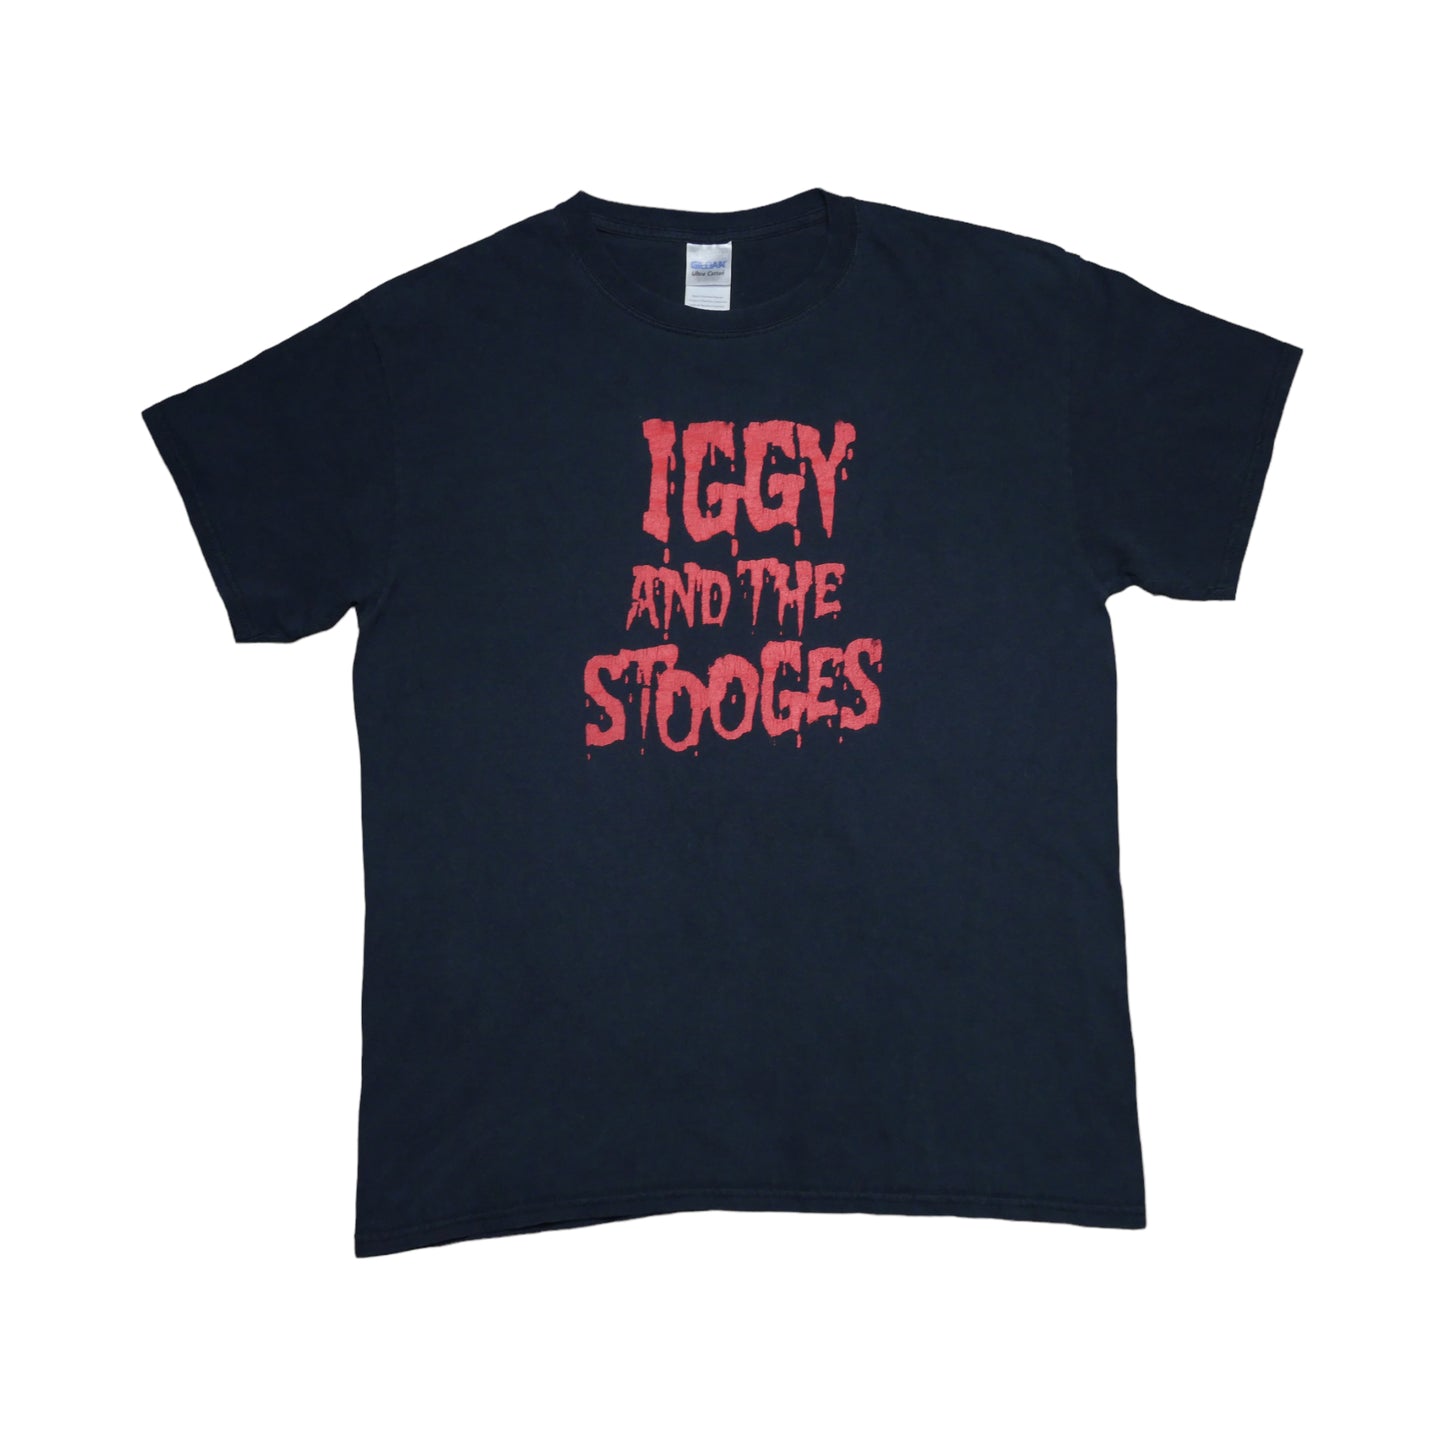 Iggy and the Stooges Shirt - Large